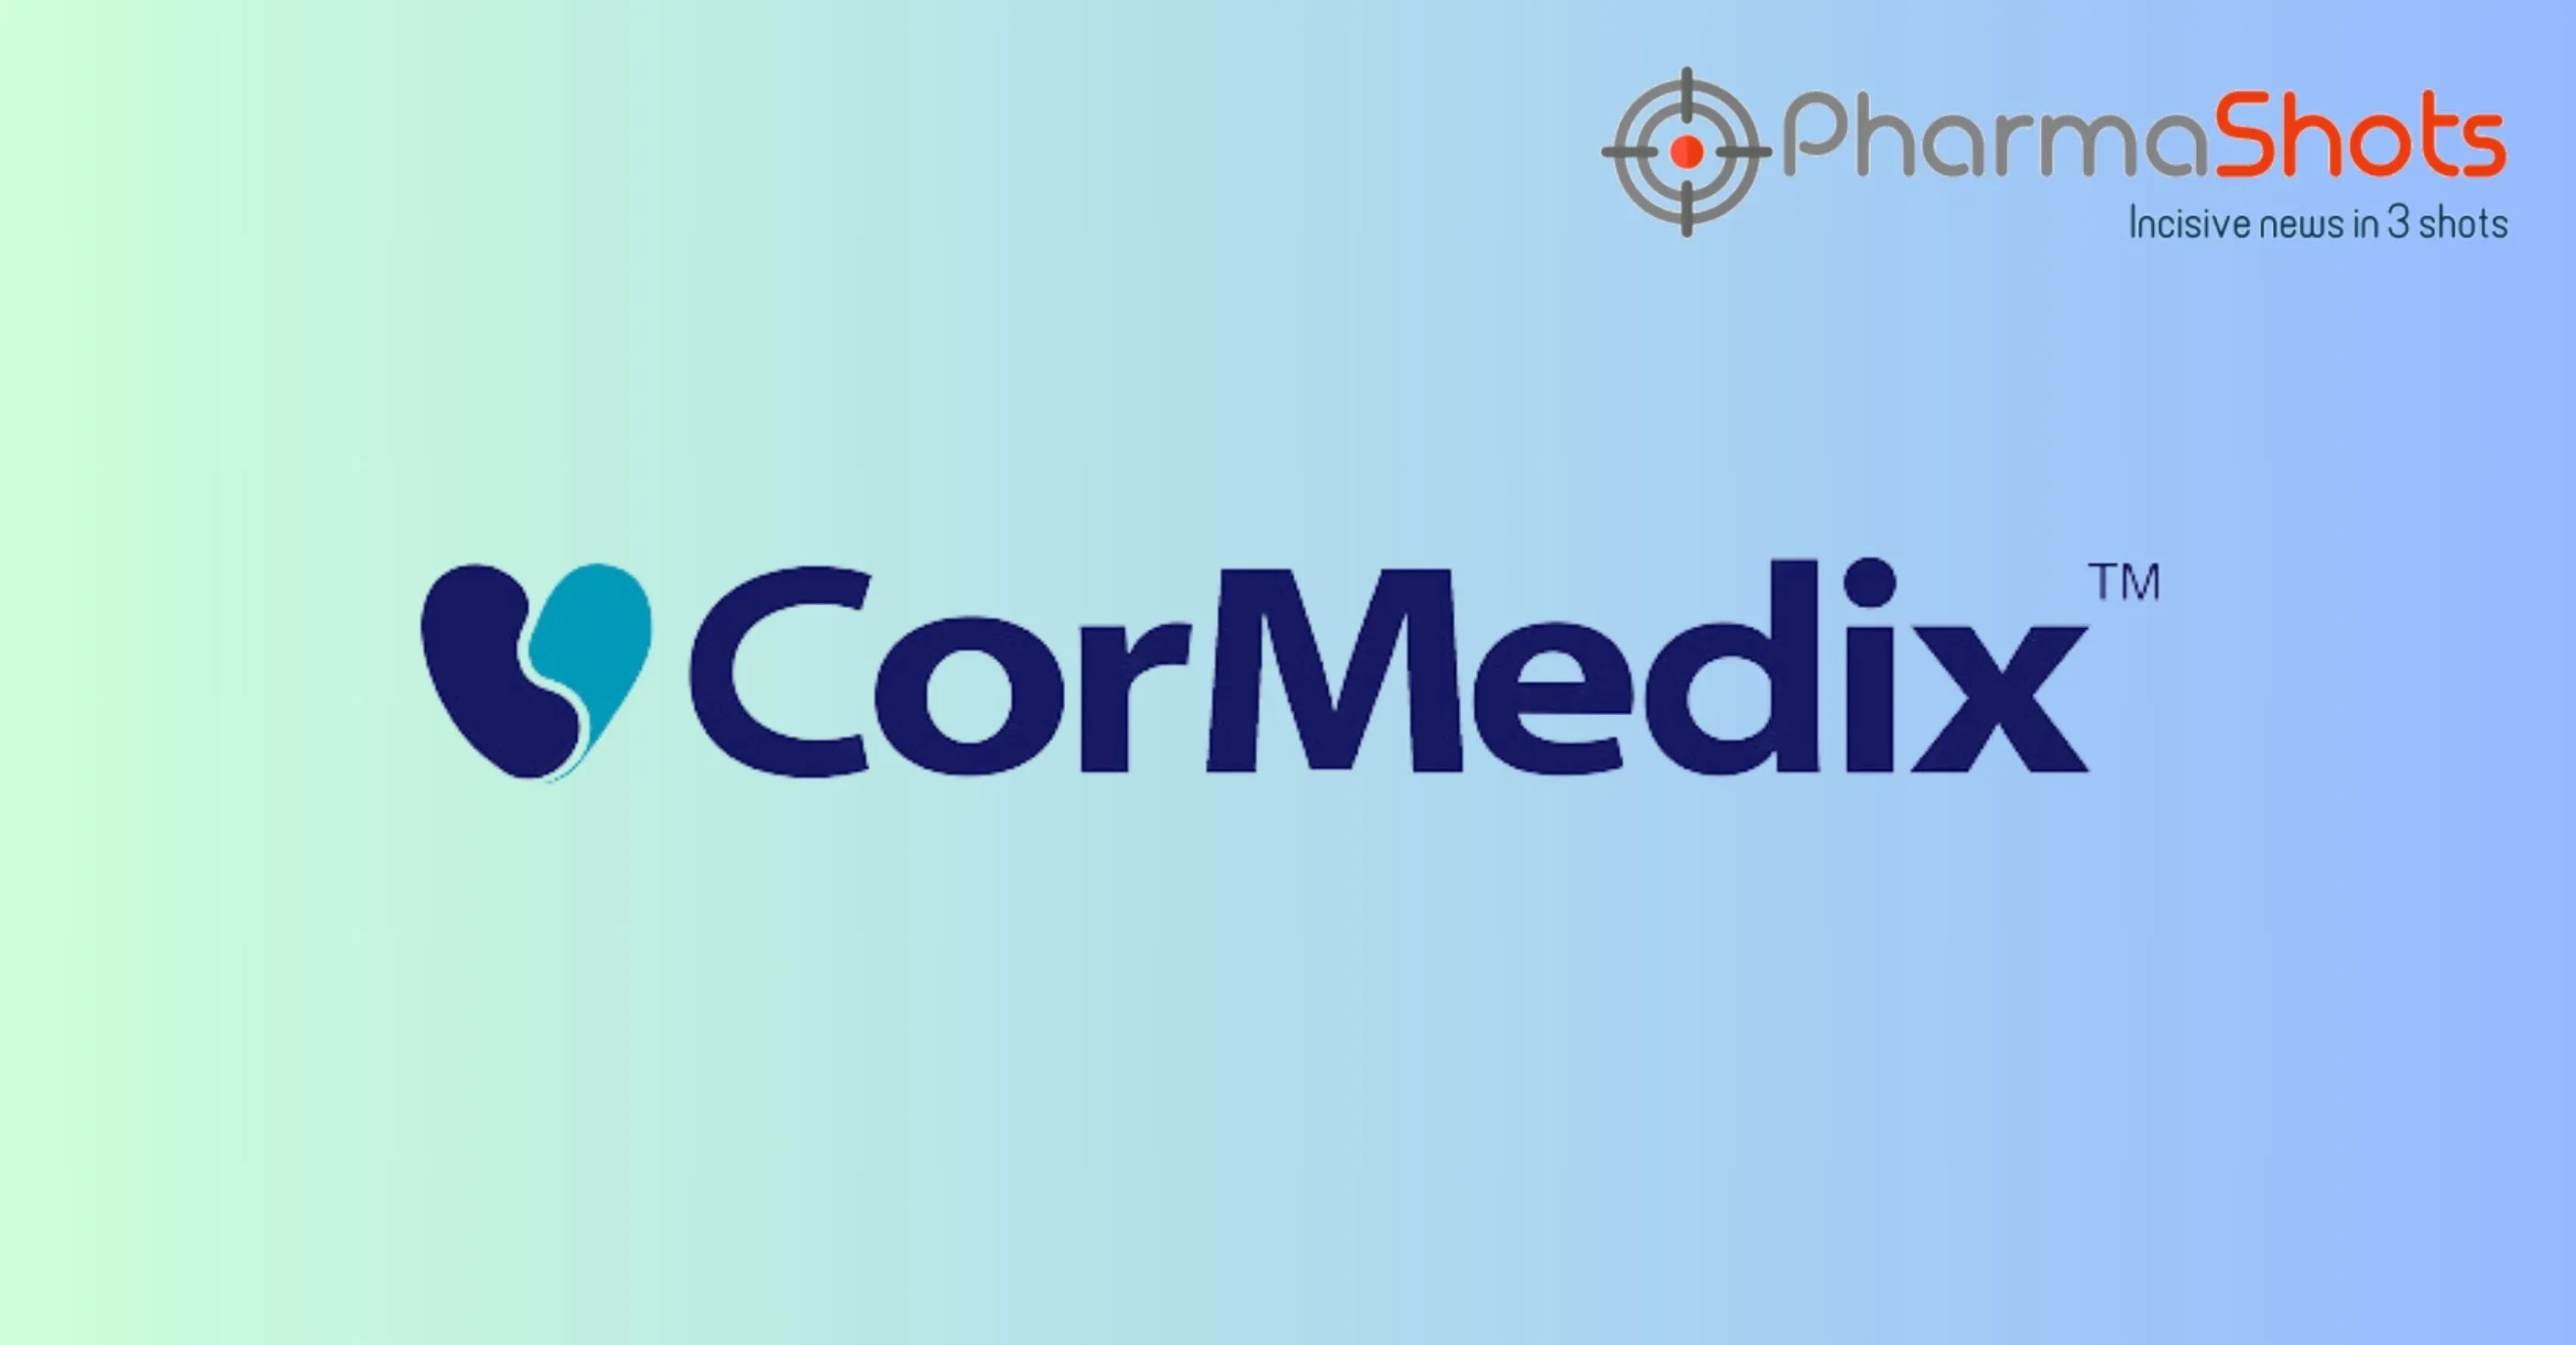 Cormedix Received the US FDA’s Approval for DefenCath to Reduce Catheter-Related Bloodstream Infections (CRBSI) In Adult Hemodialysis Patients